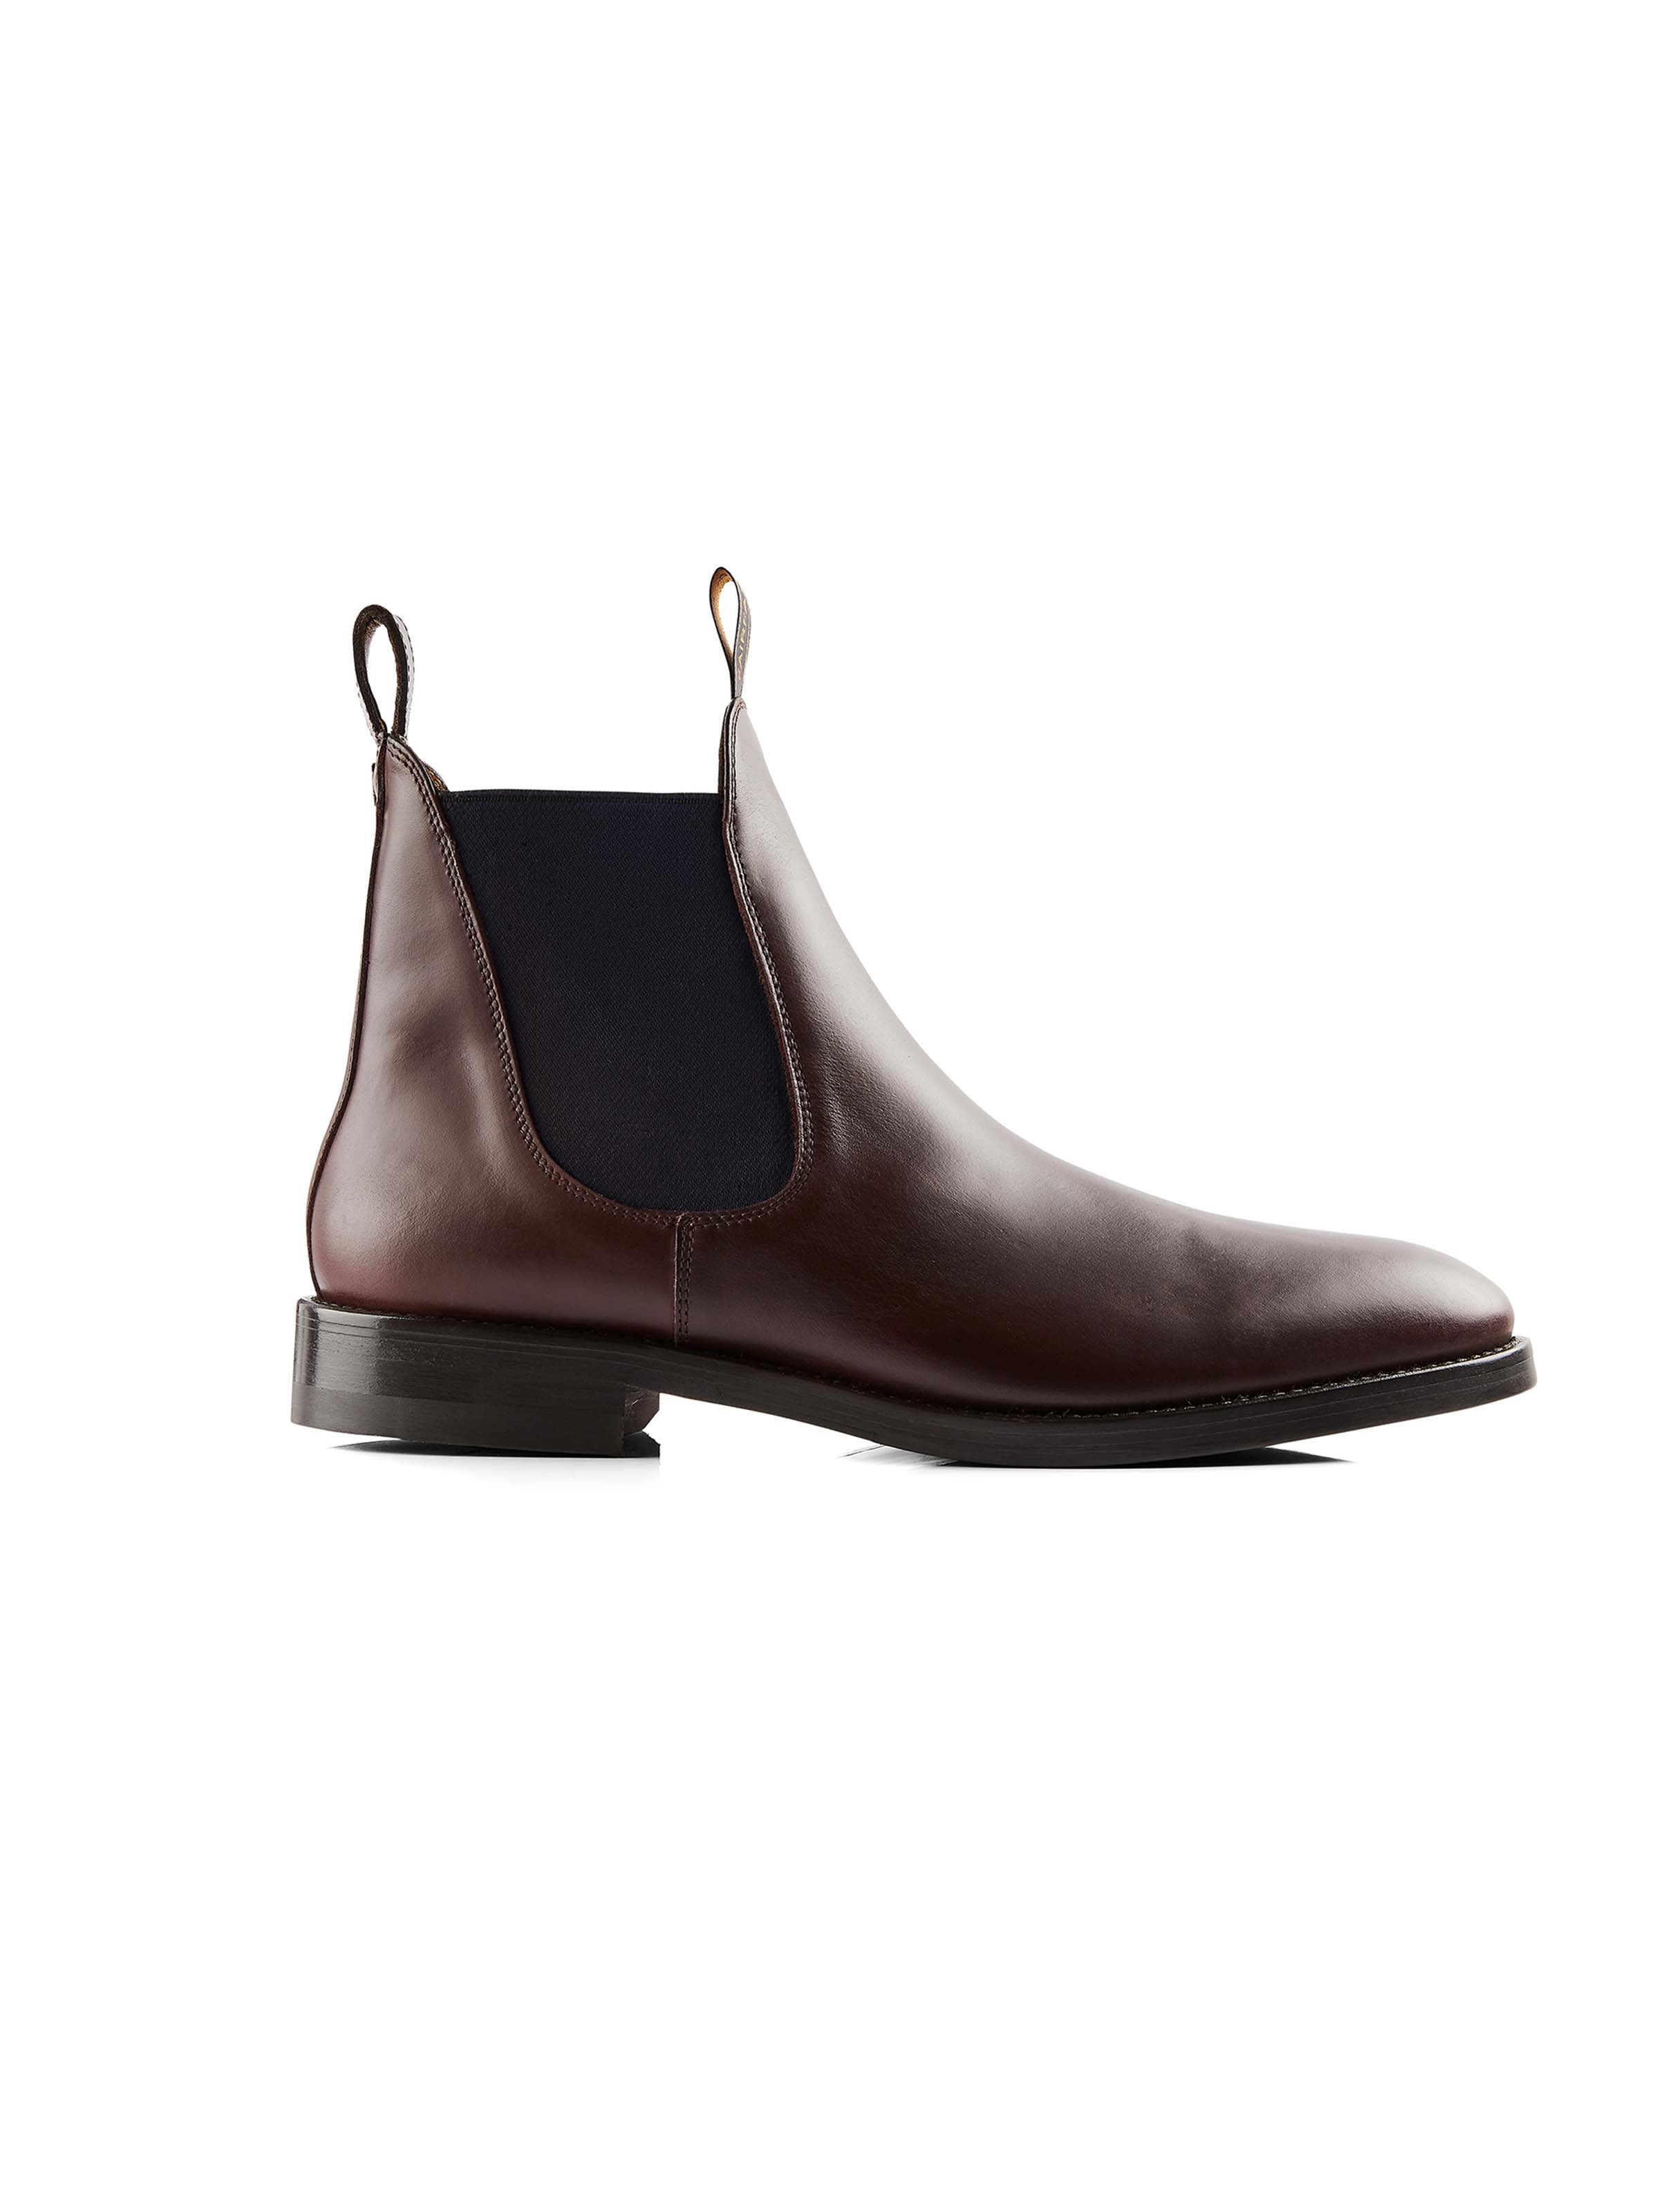 The Nelson Boot - Mahogany Leather